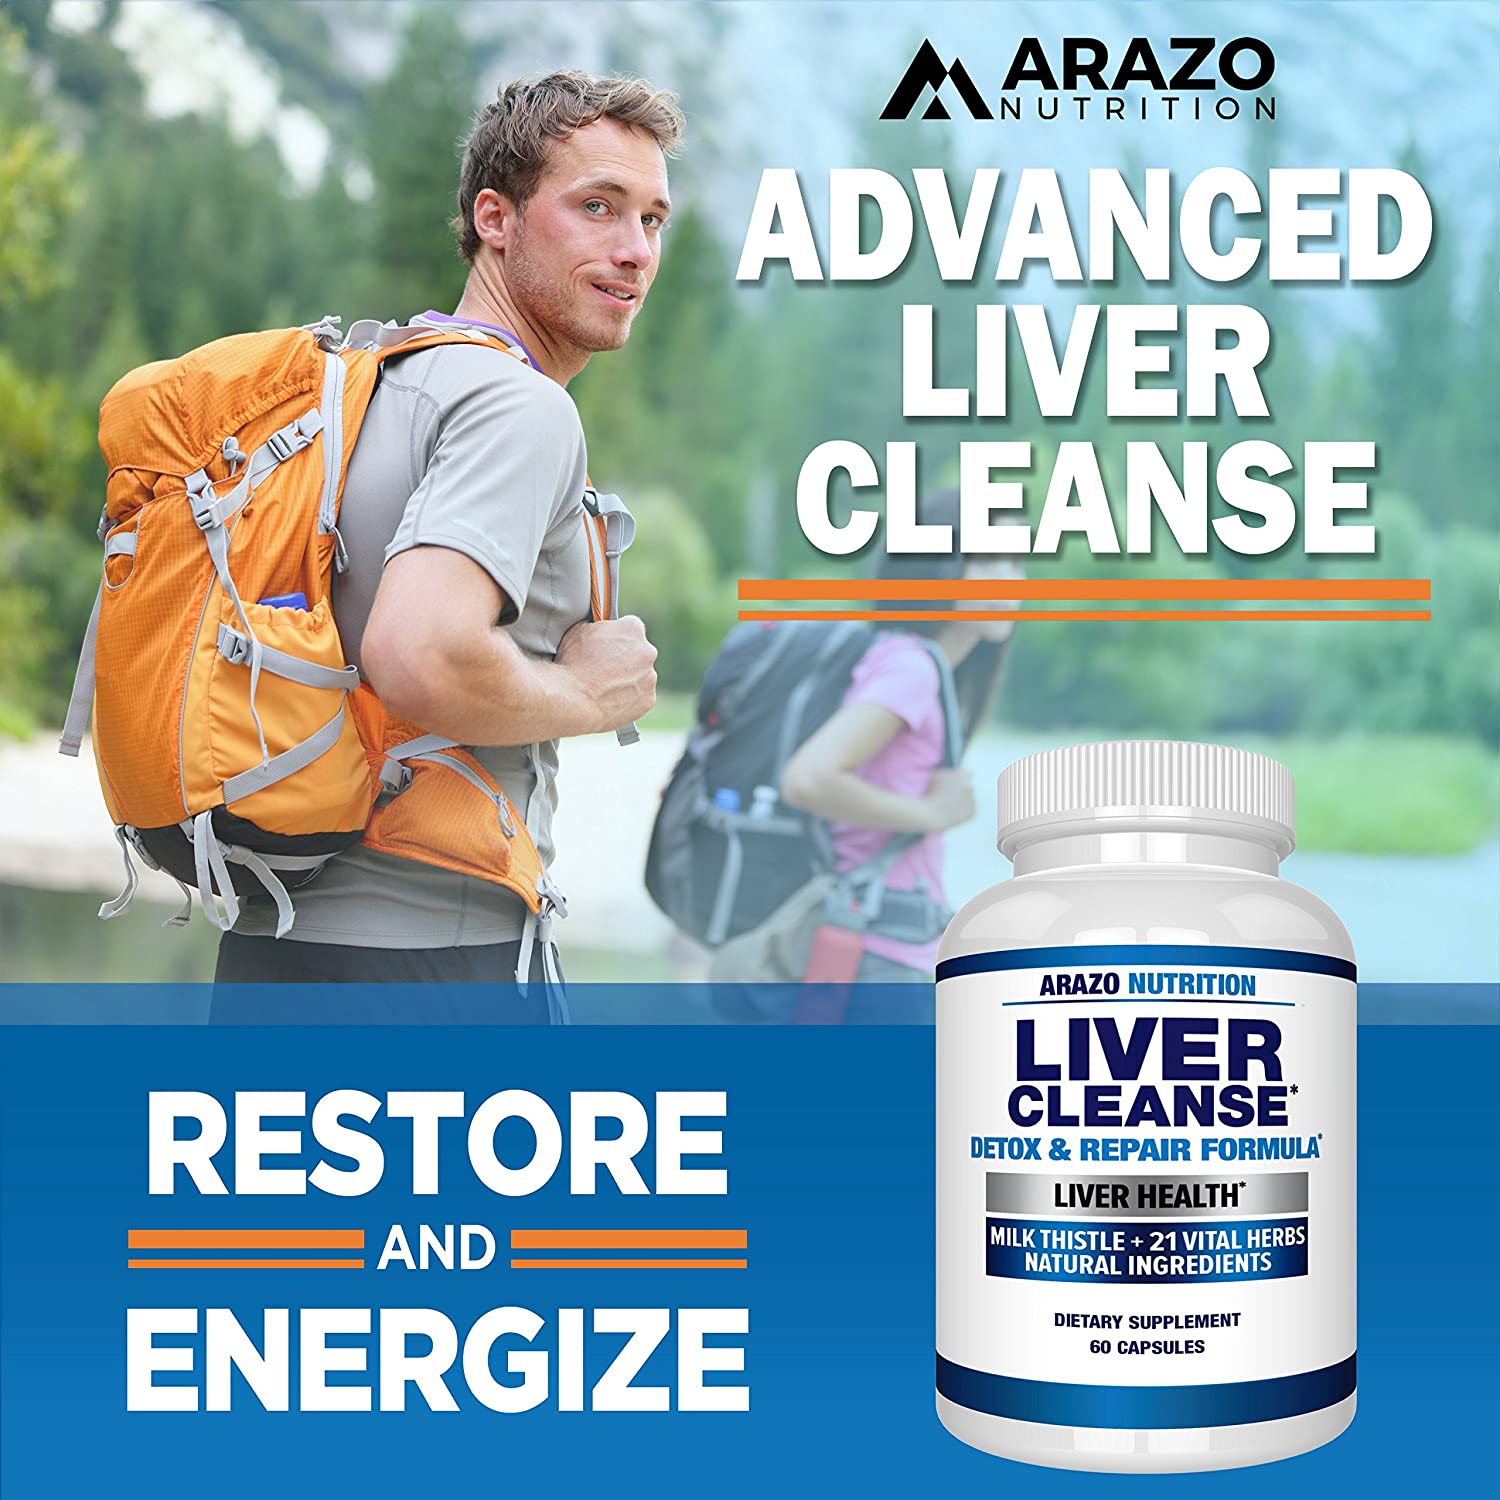 Advanced liver cleanse